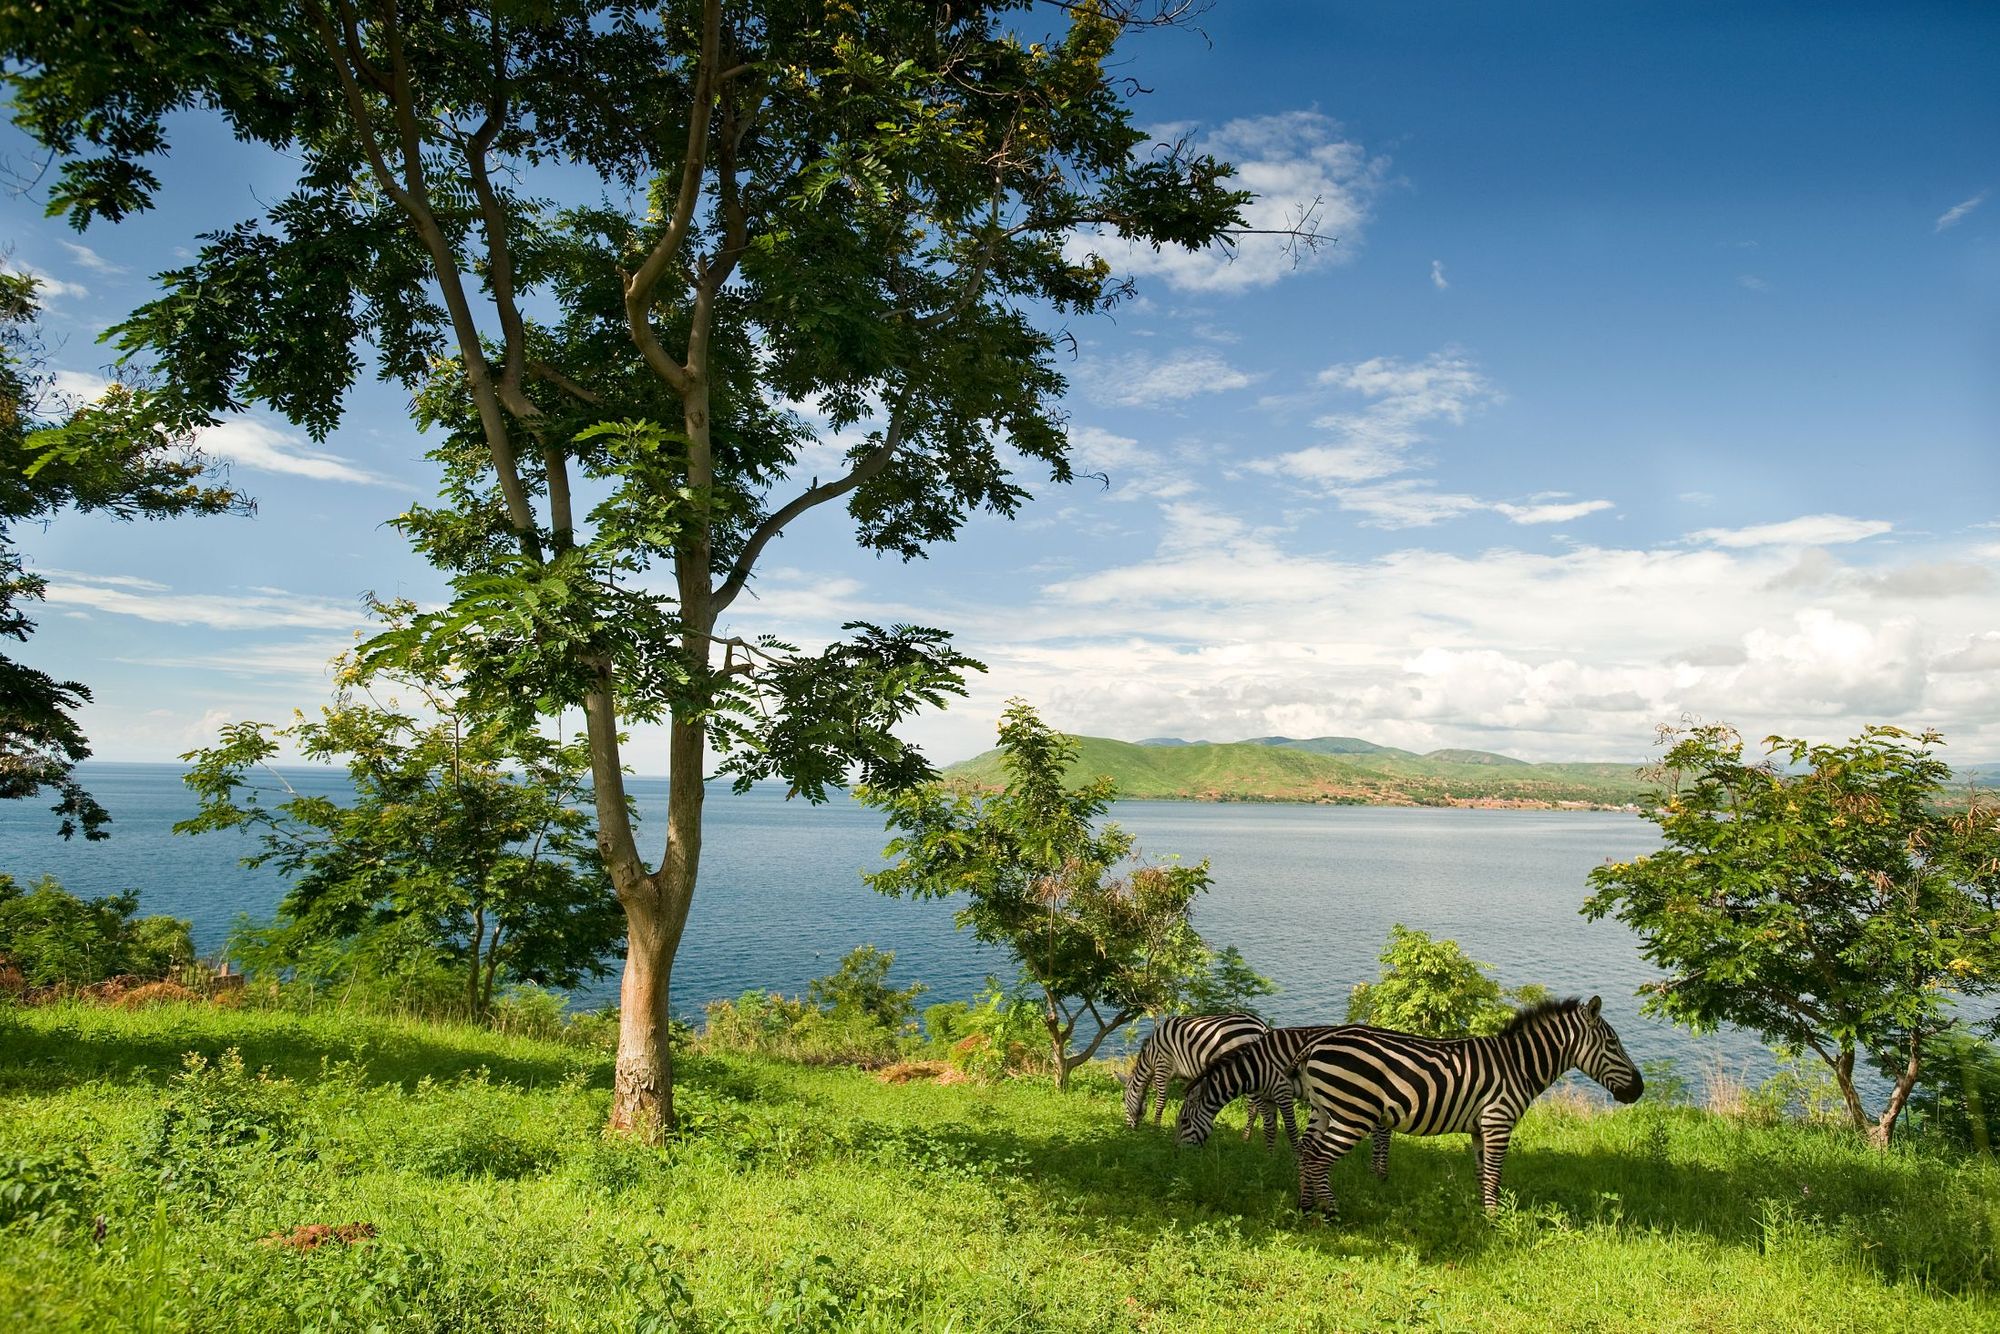 A Guide to Lake Tanganyika, One of Africa’s Great Lakes